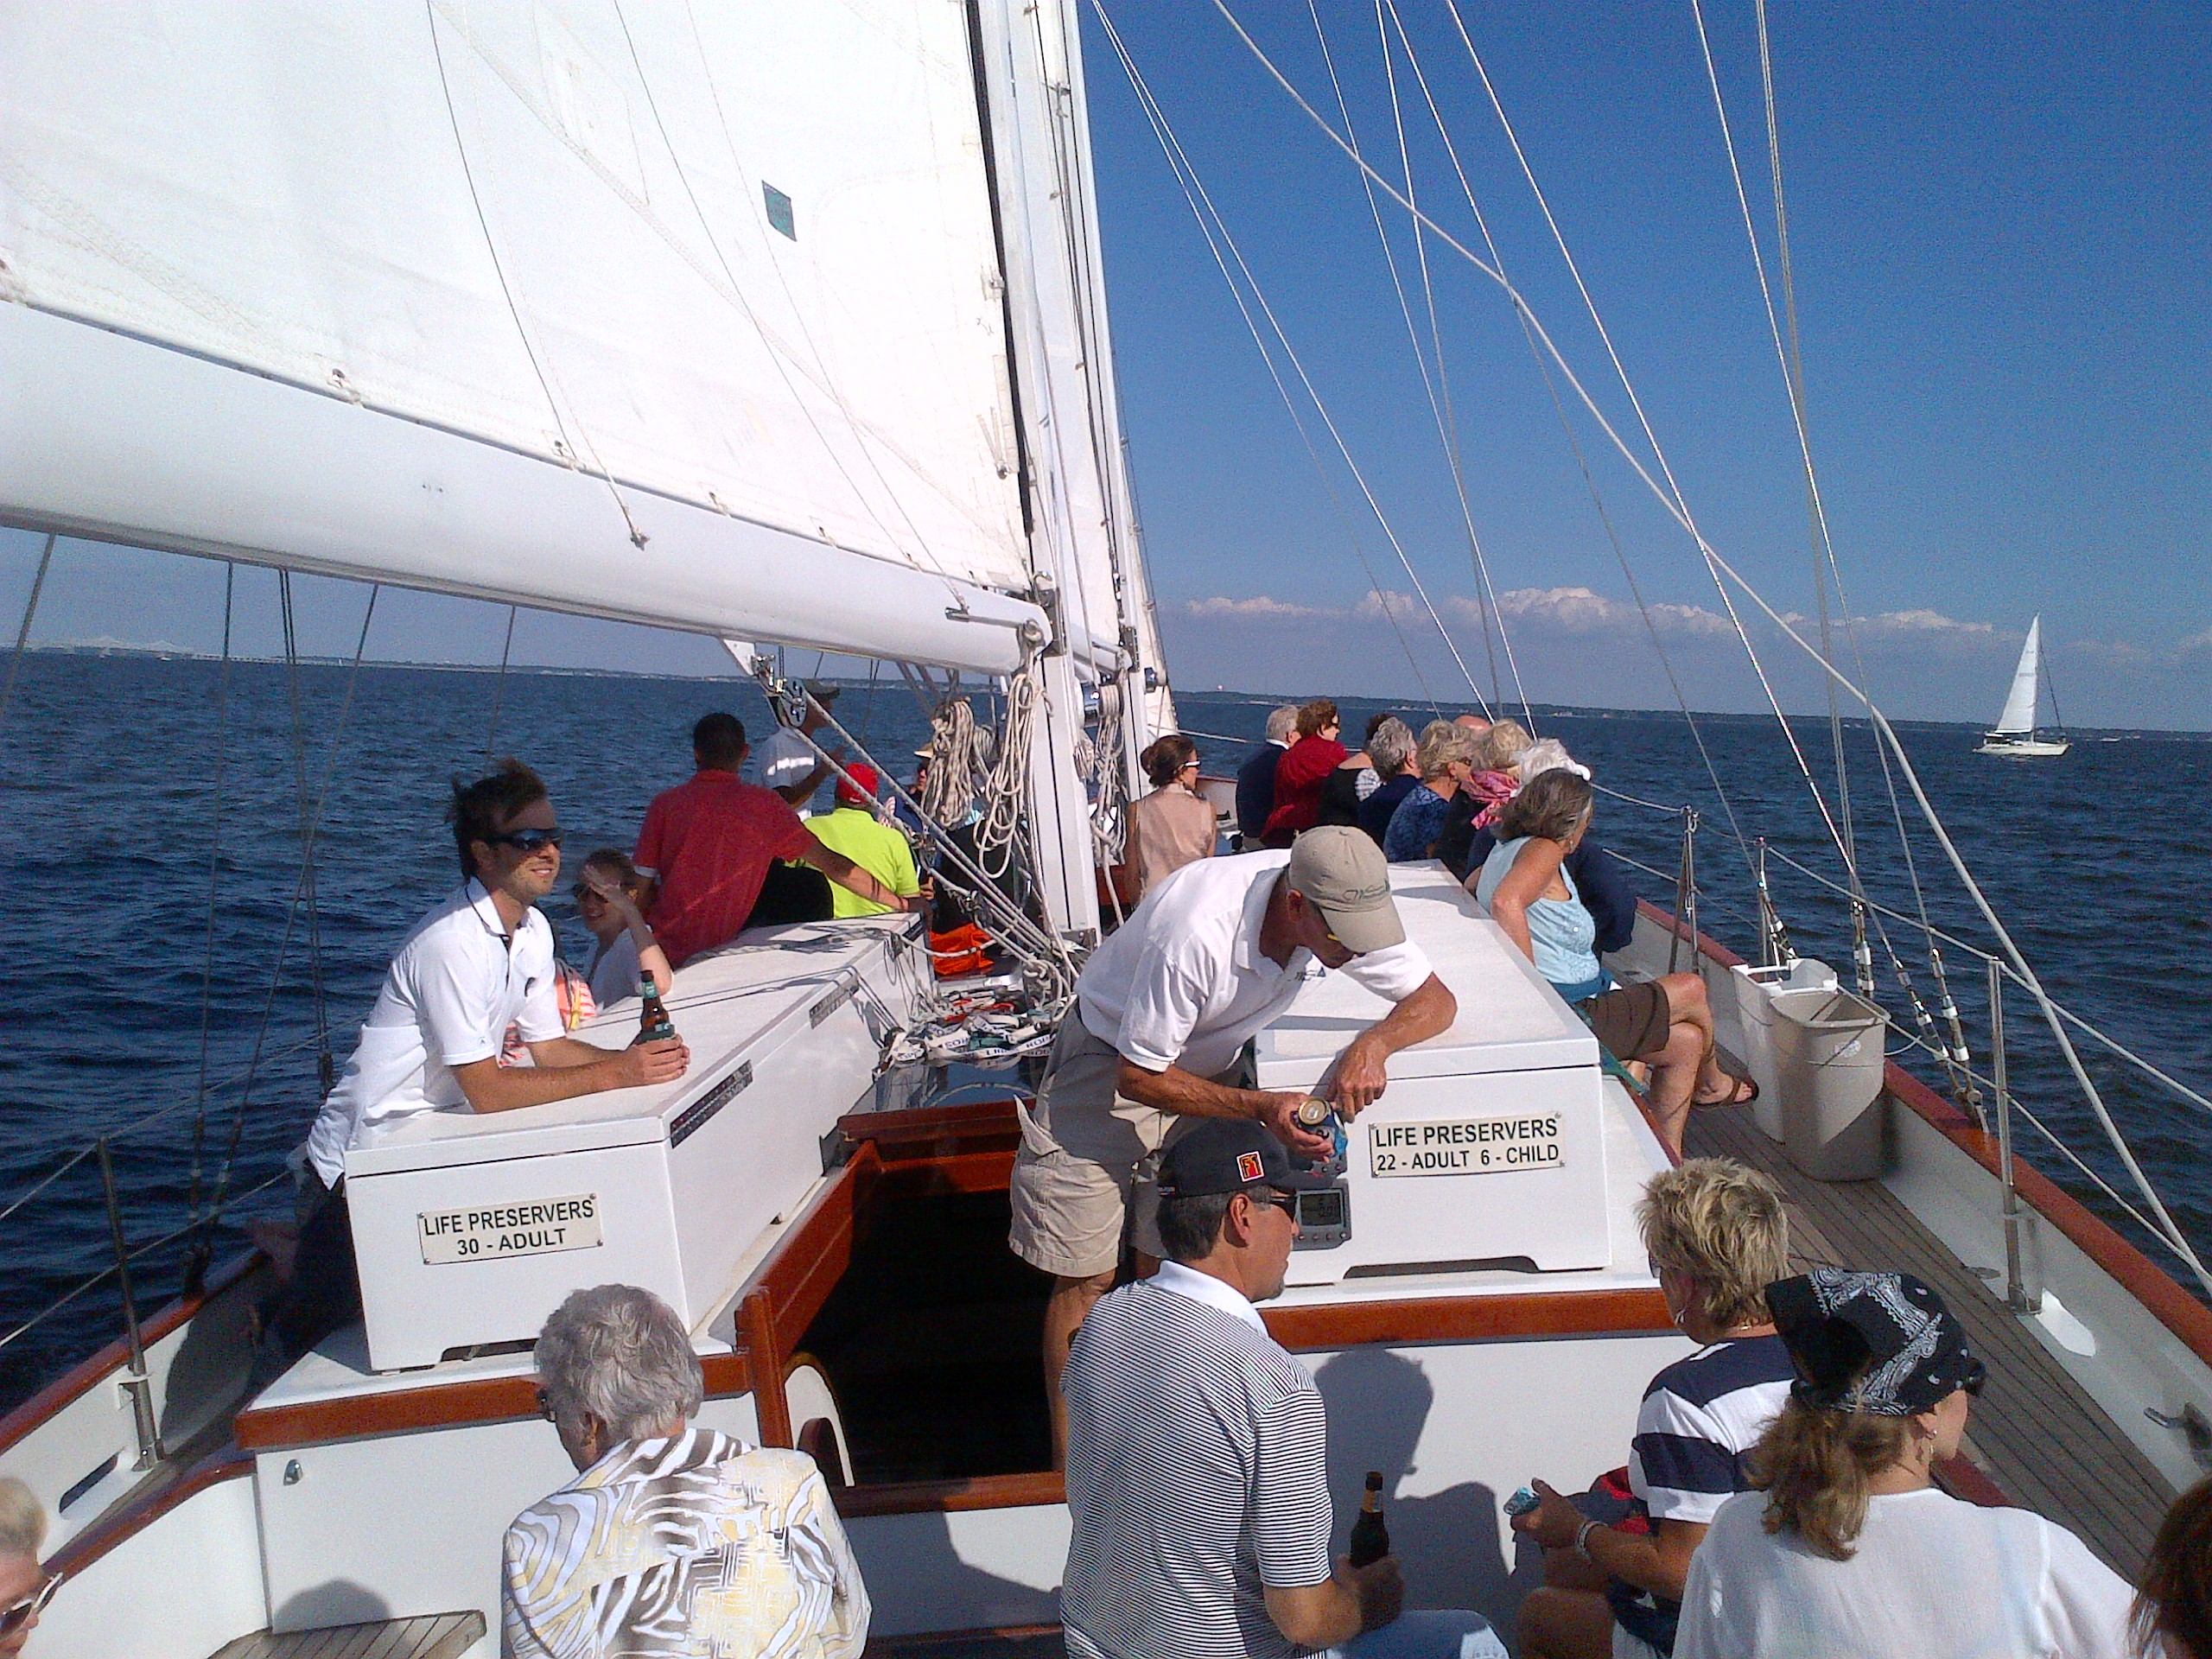 Guests enjoying a breezy sunny sail on the schooner